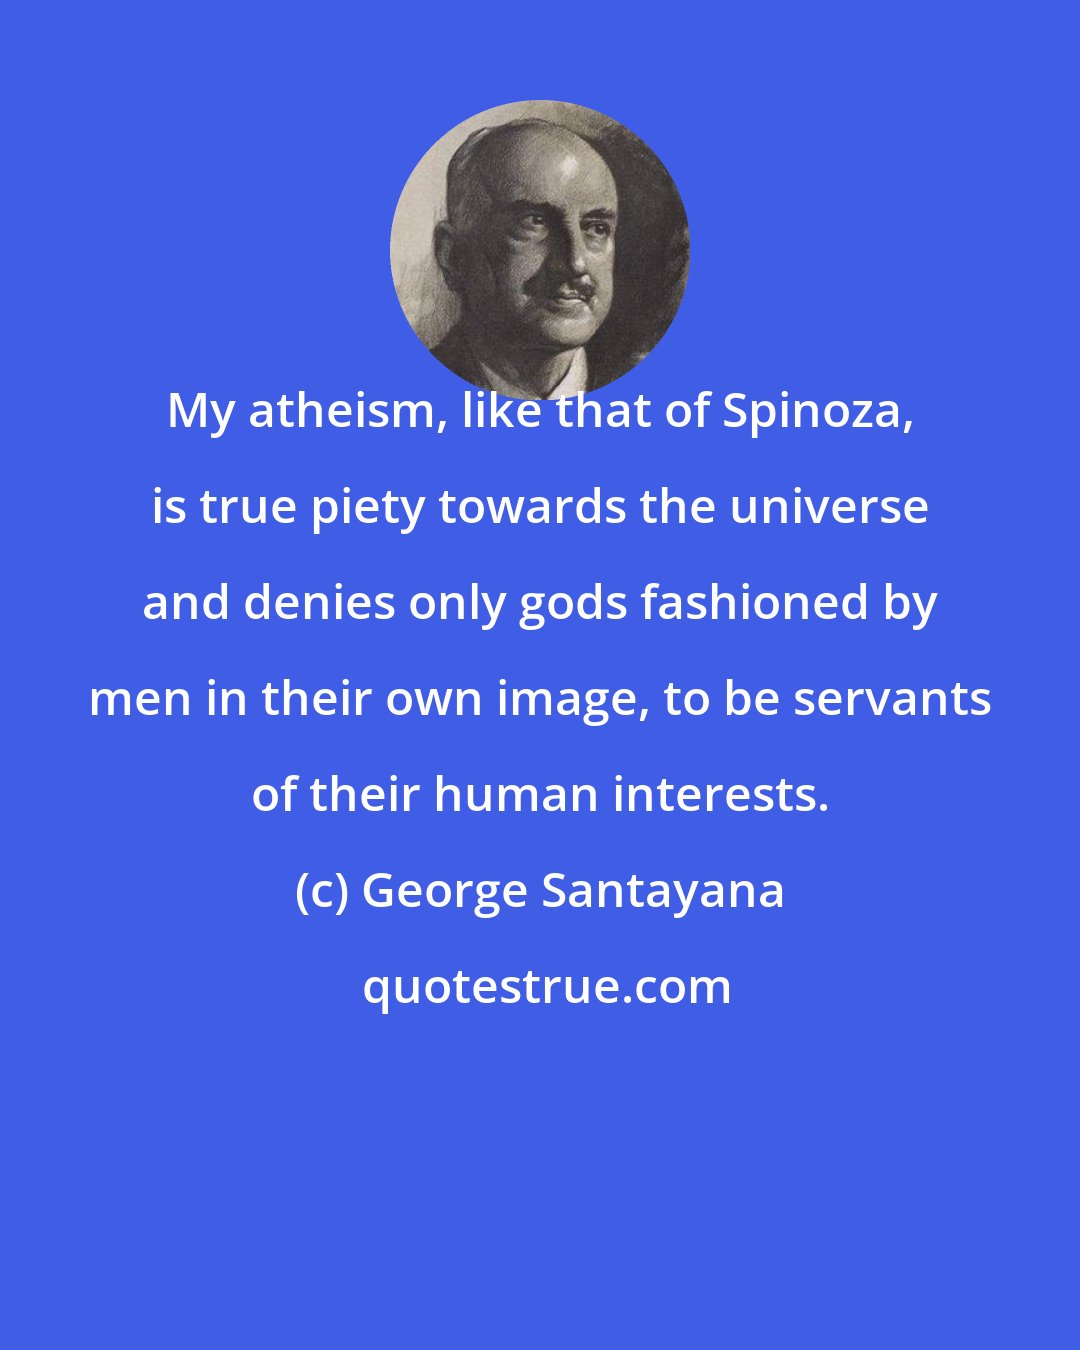 George Santayana: My atheism, like that of Spinoza, is true piety towards the universe and denies only gods fashioned by men in their own image, to be servants of their human interests.